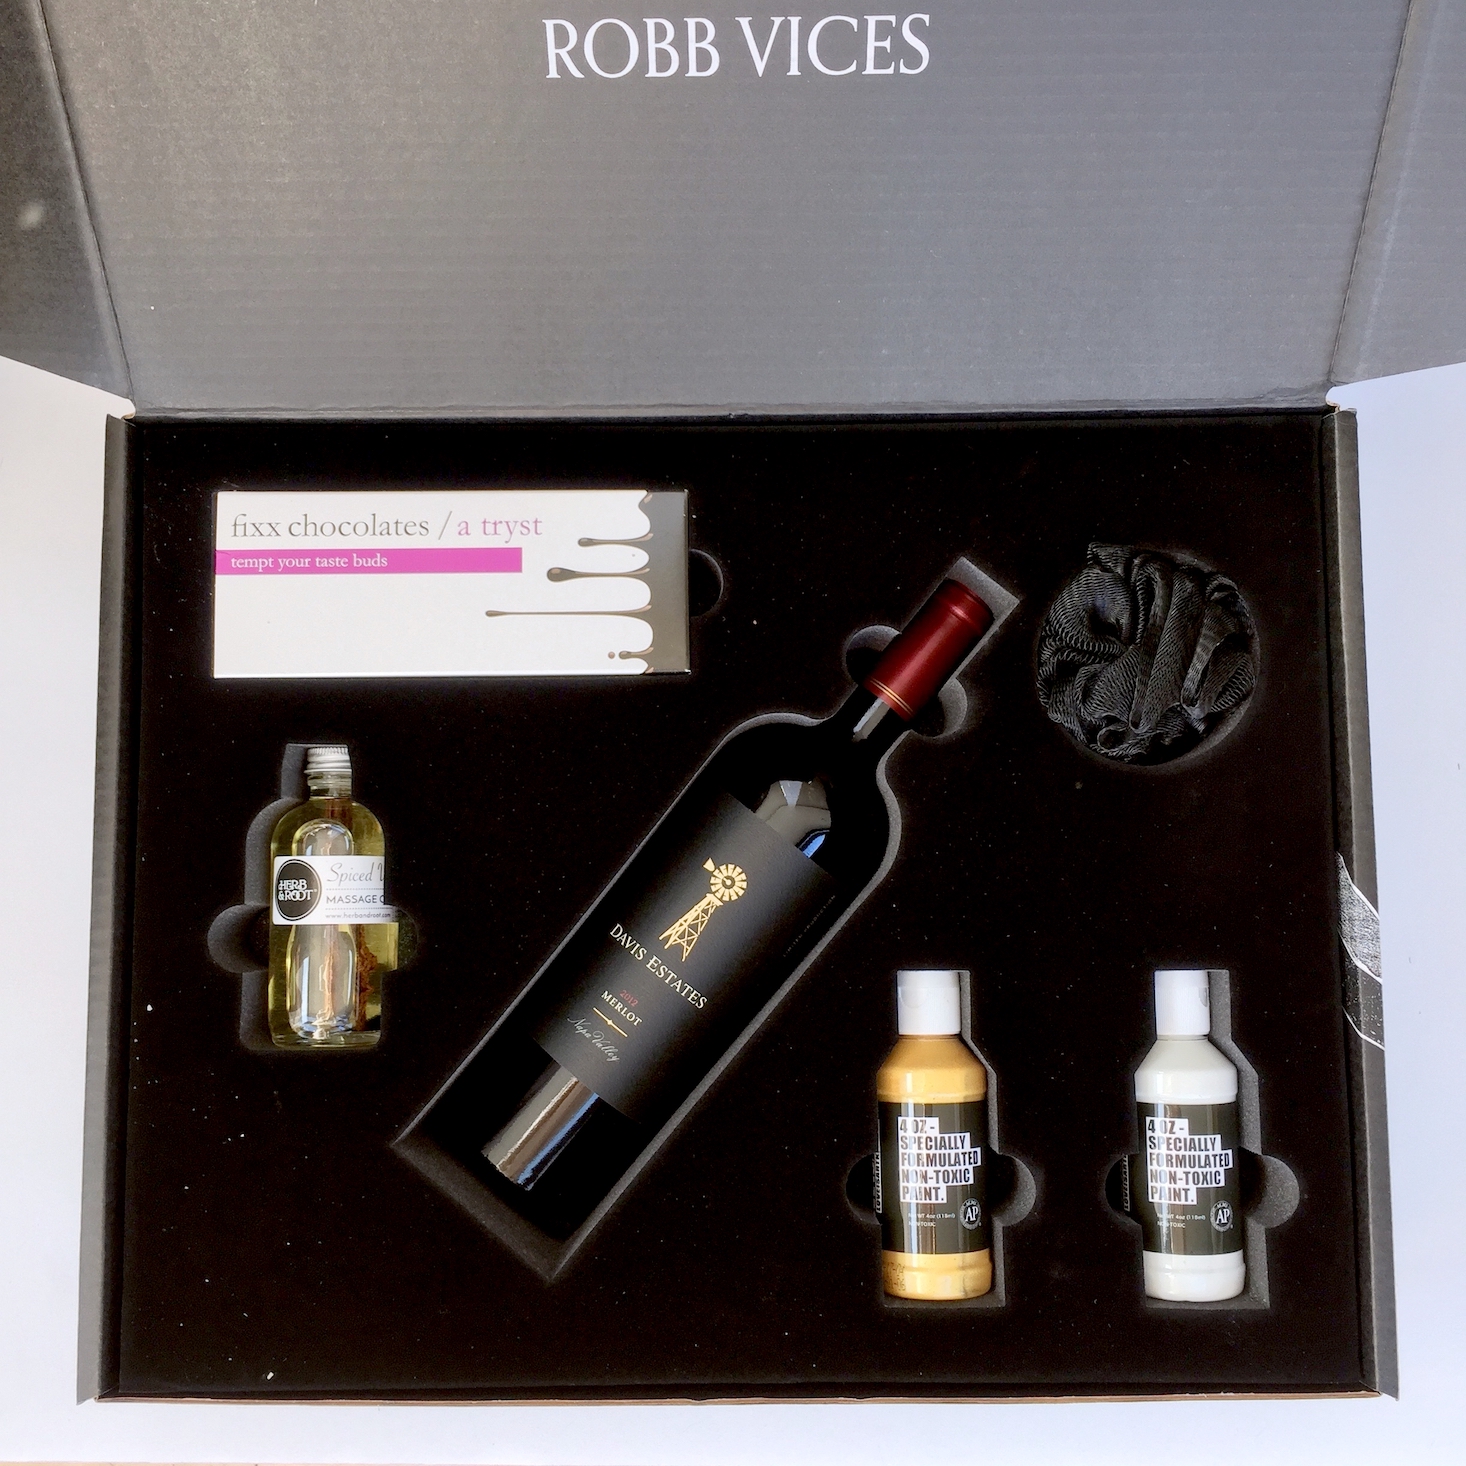 Robb-vices-february-2017-box-inside